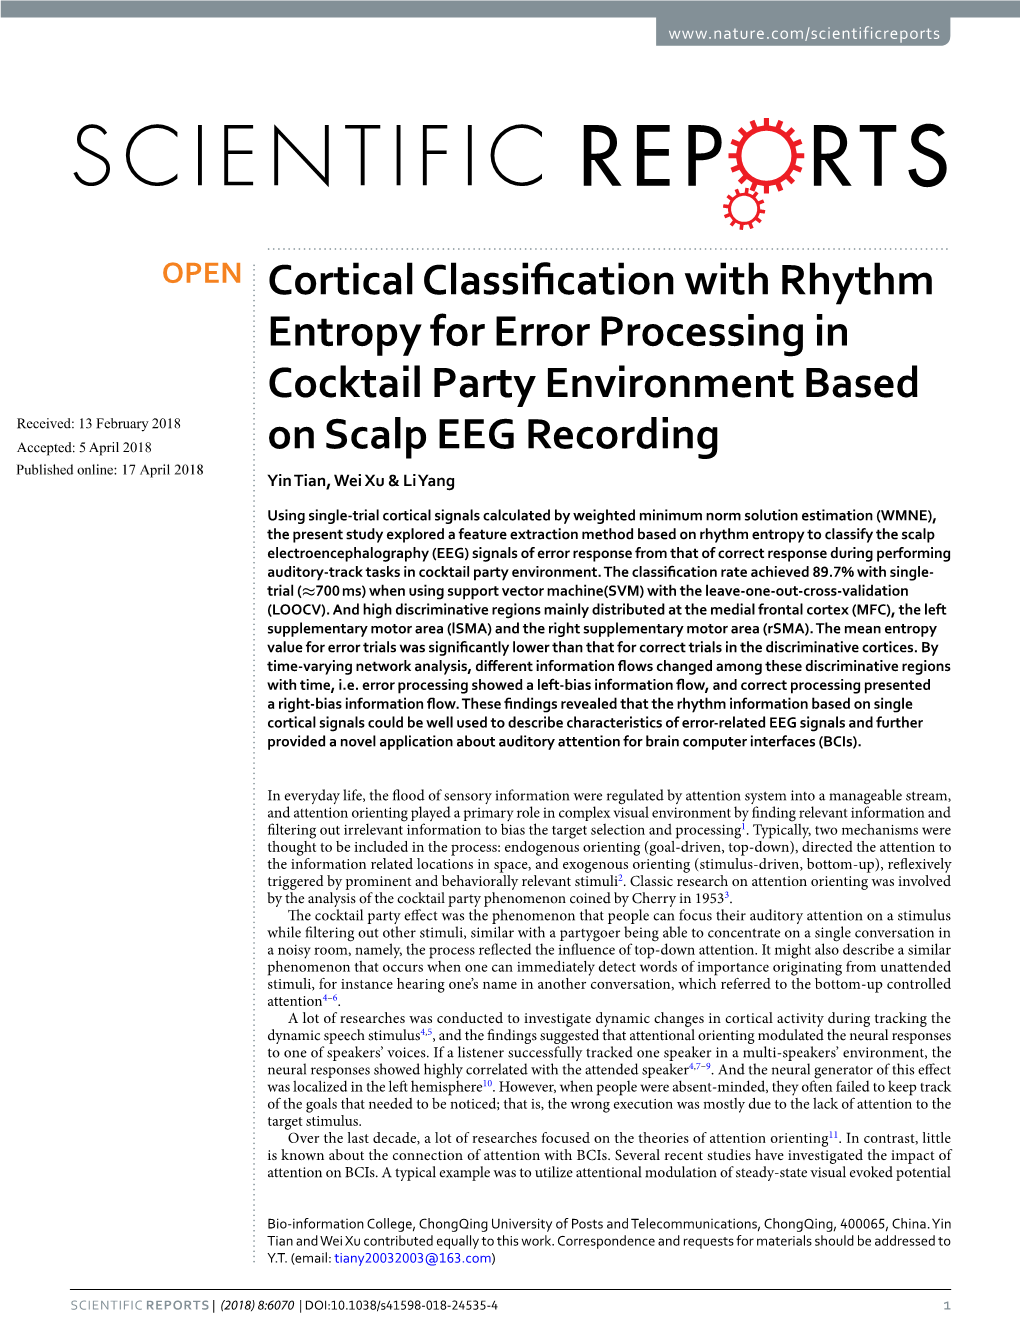 Cortical Classification with Rhythm Entropy for Error Processing In